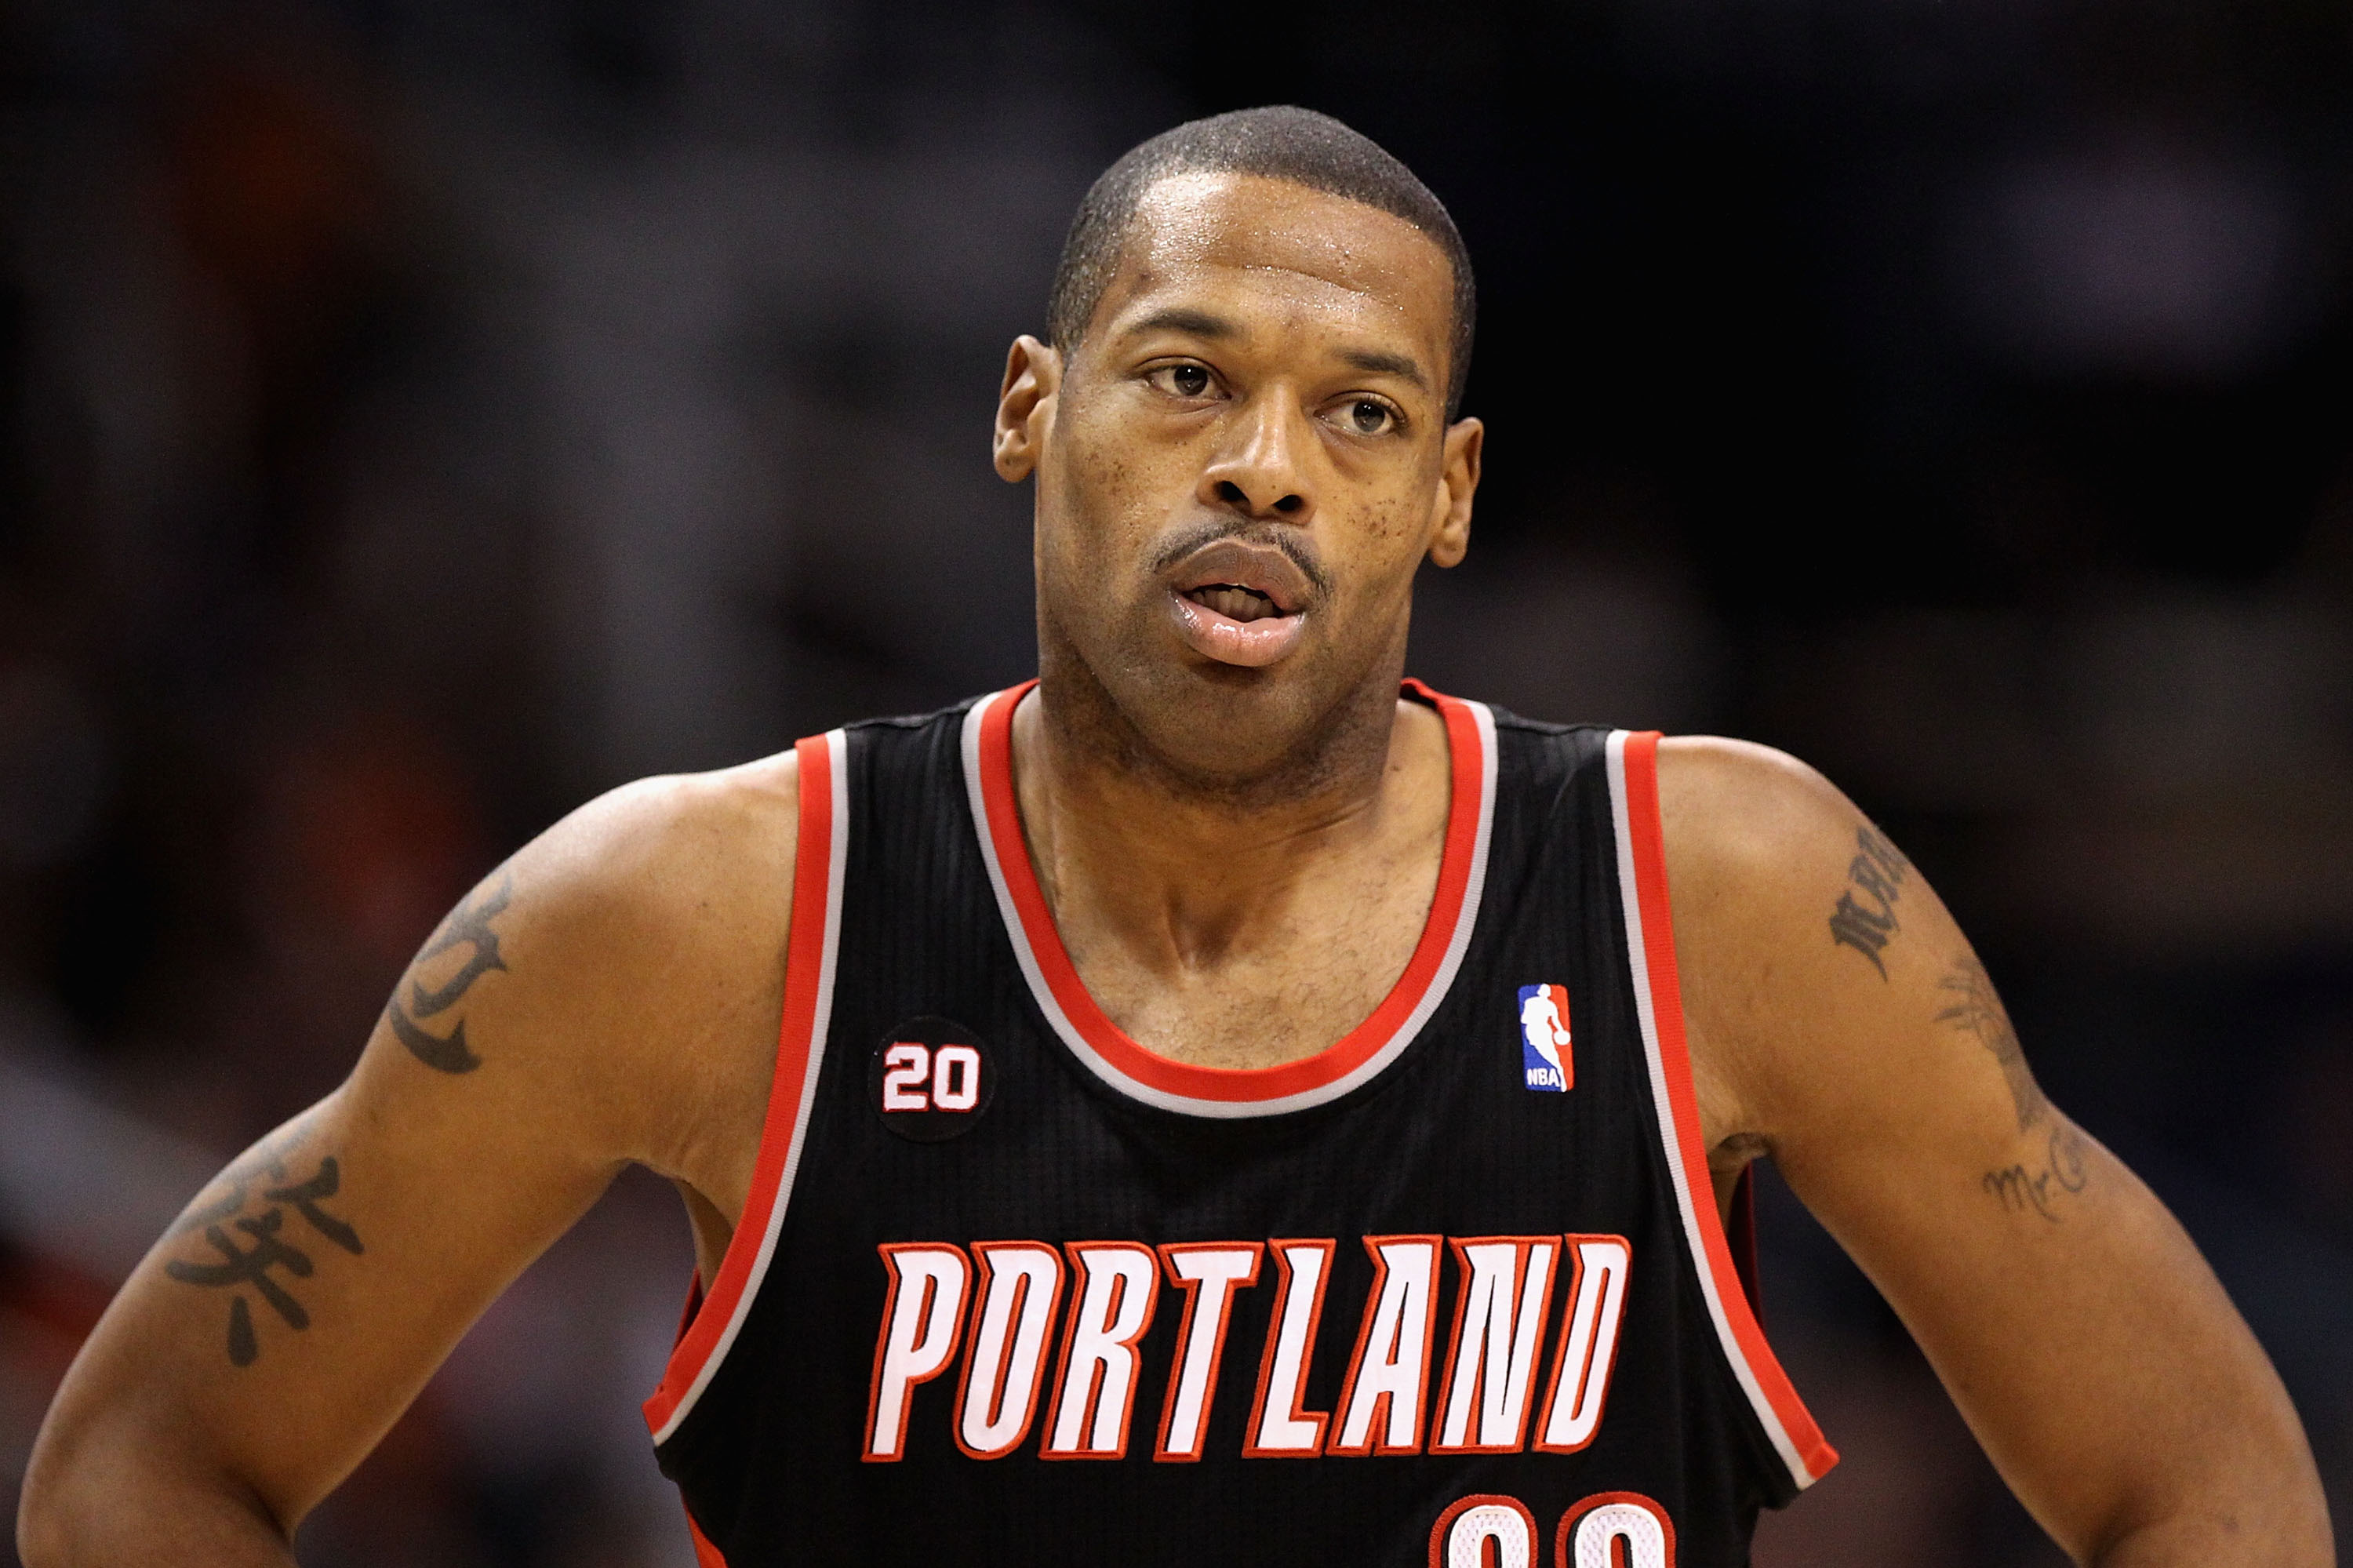 New York Knicks: The trade that sent Marcus Camby to New York